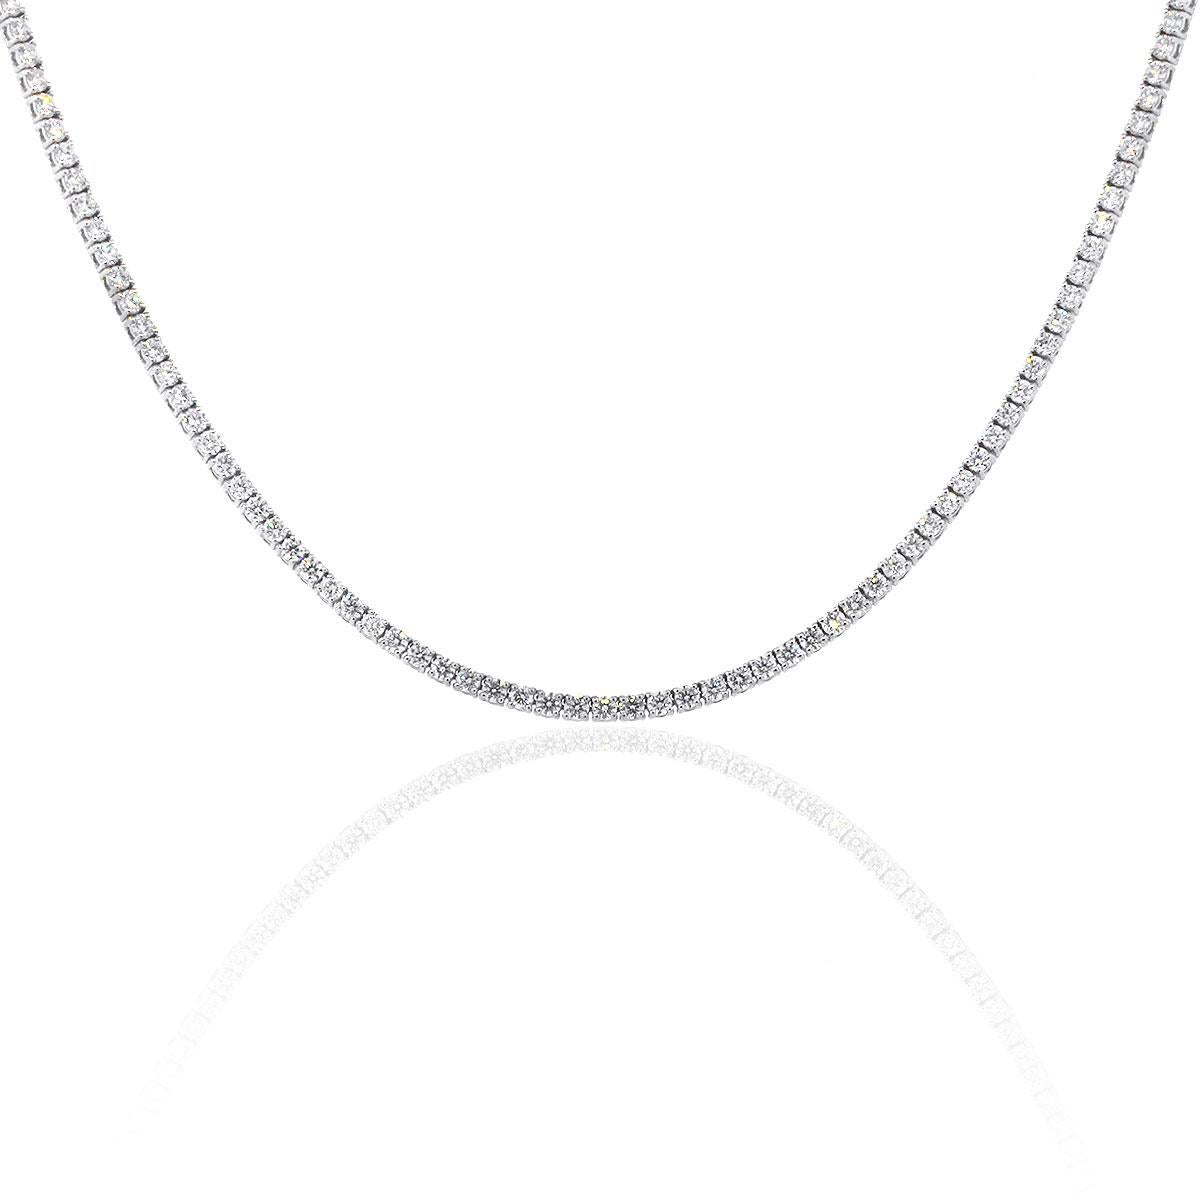 Material: 18k White Gold
Diamond Details: Approximately 9.03ctw round brilliant diamonds. Diamonds are G/H in color and VS in clarity.
Necklace Measurements: 18″
Clasp: Tongue in Box with safety clasp
Total Weight: 21g (13.4dwt)
SKU: A30311884